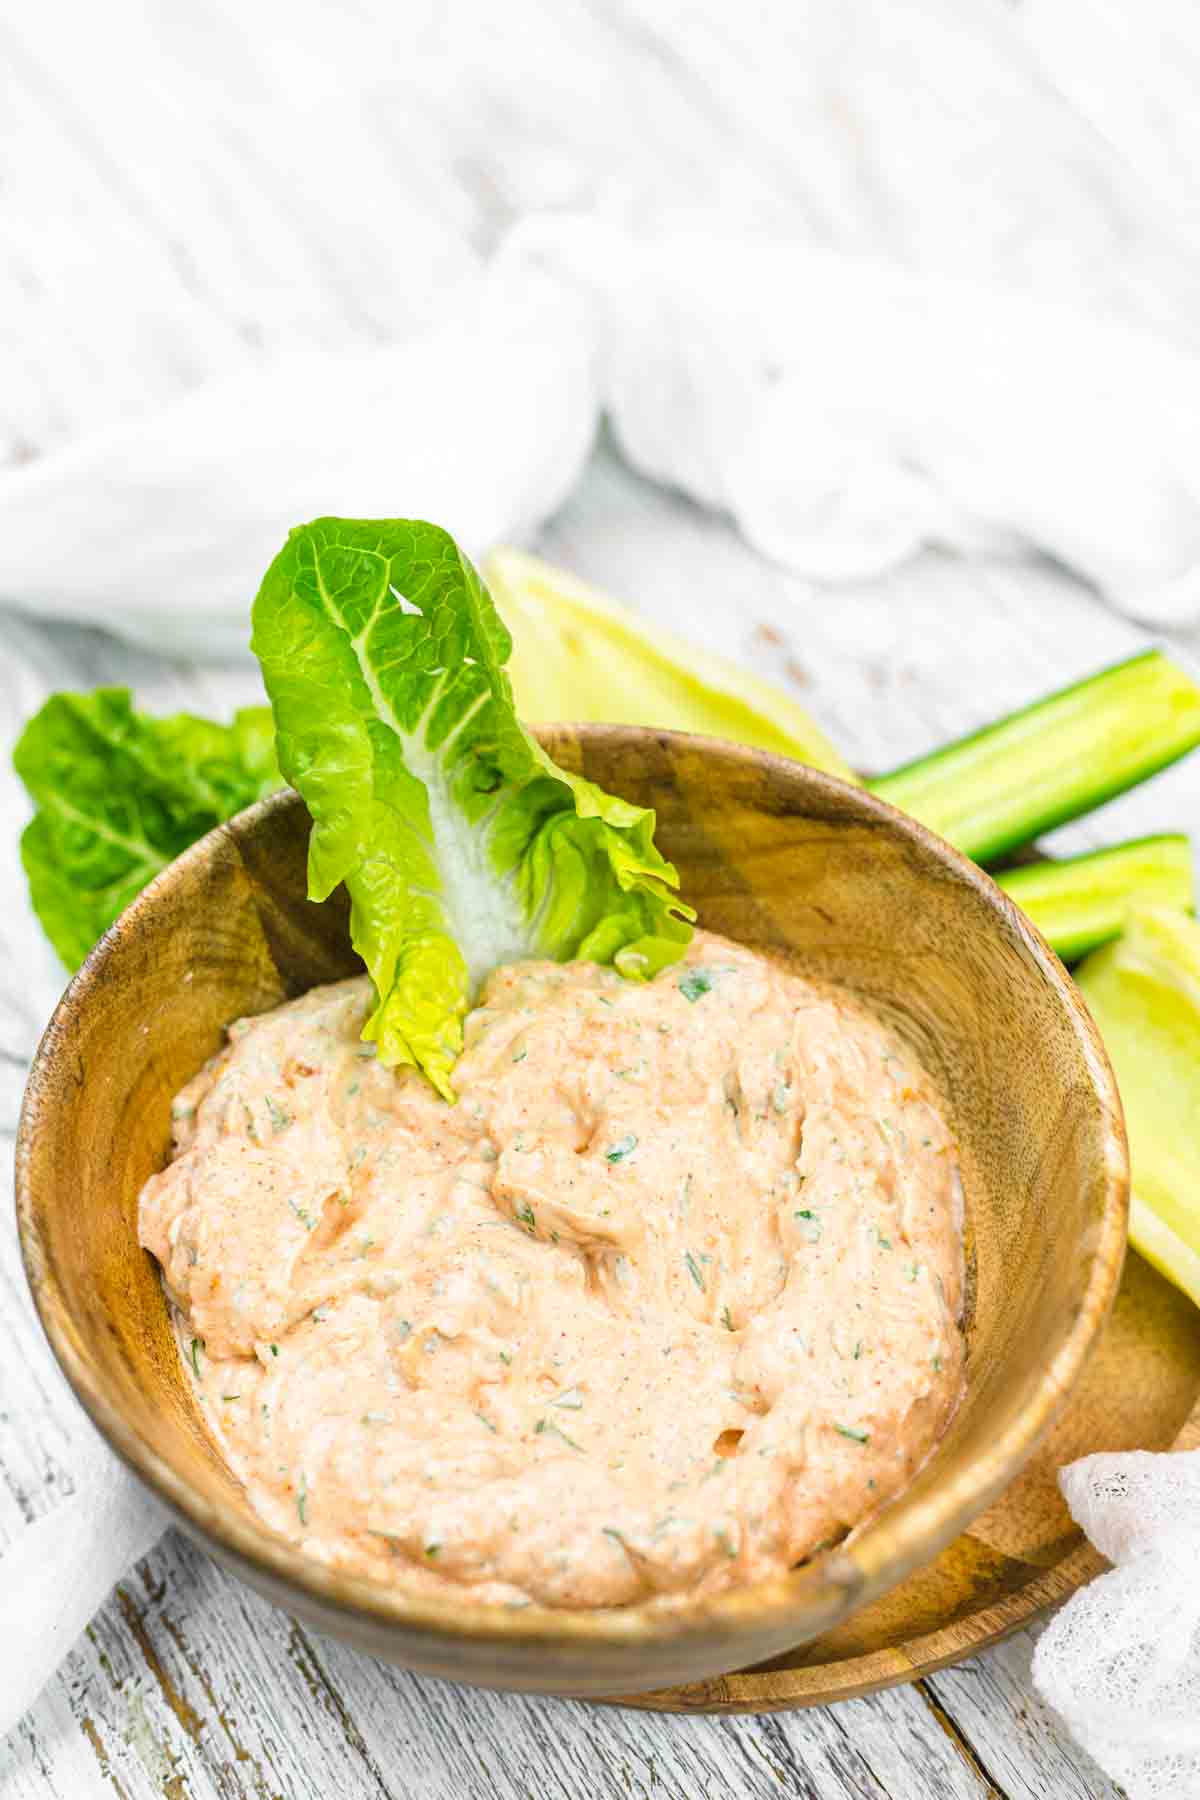 A bowl of creamy dip garnished with a leaf of lettuce.